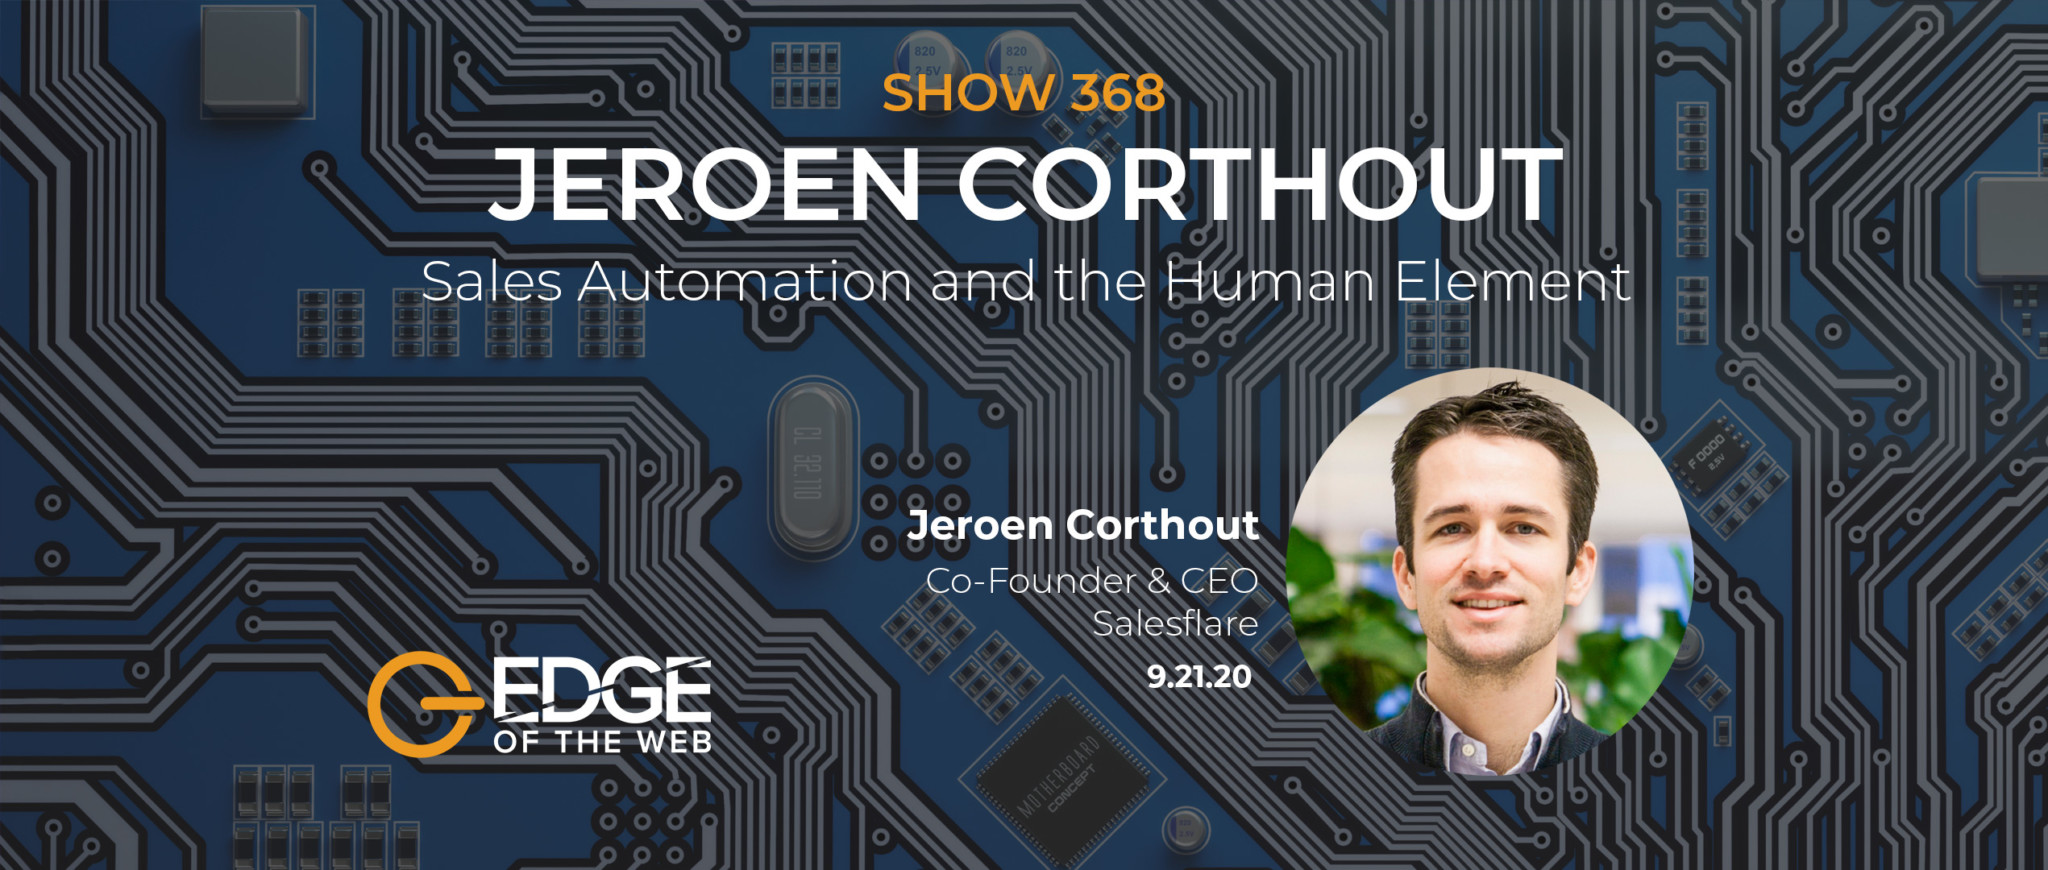 Jeroen Corthout EP368 Featured Image